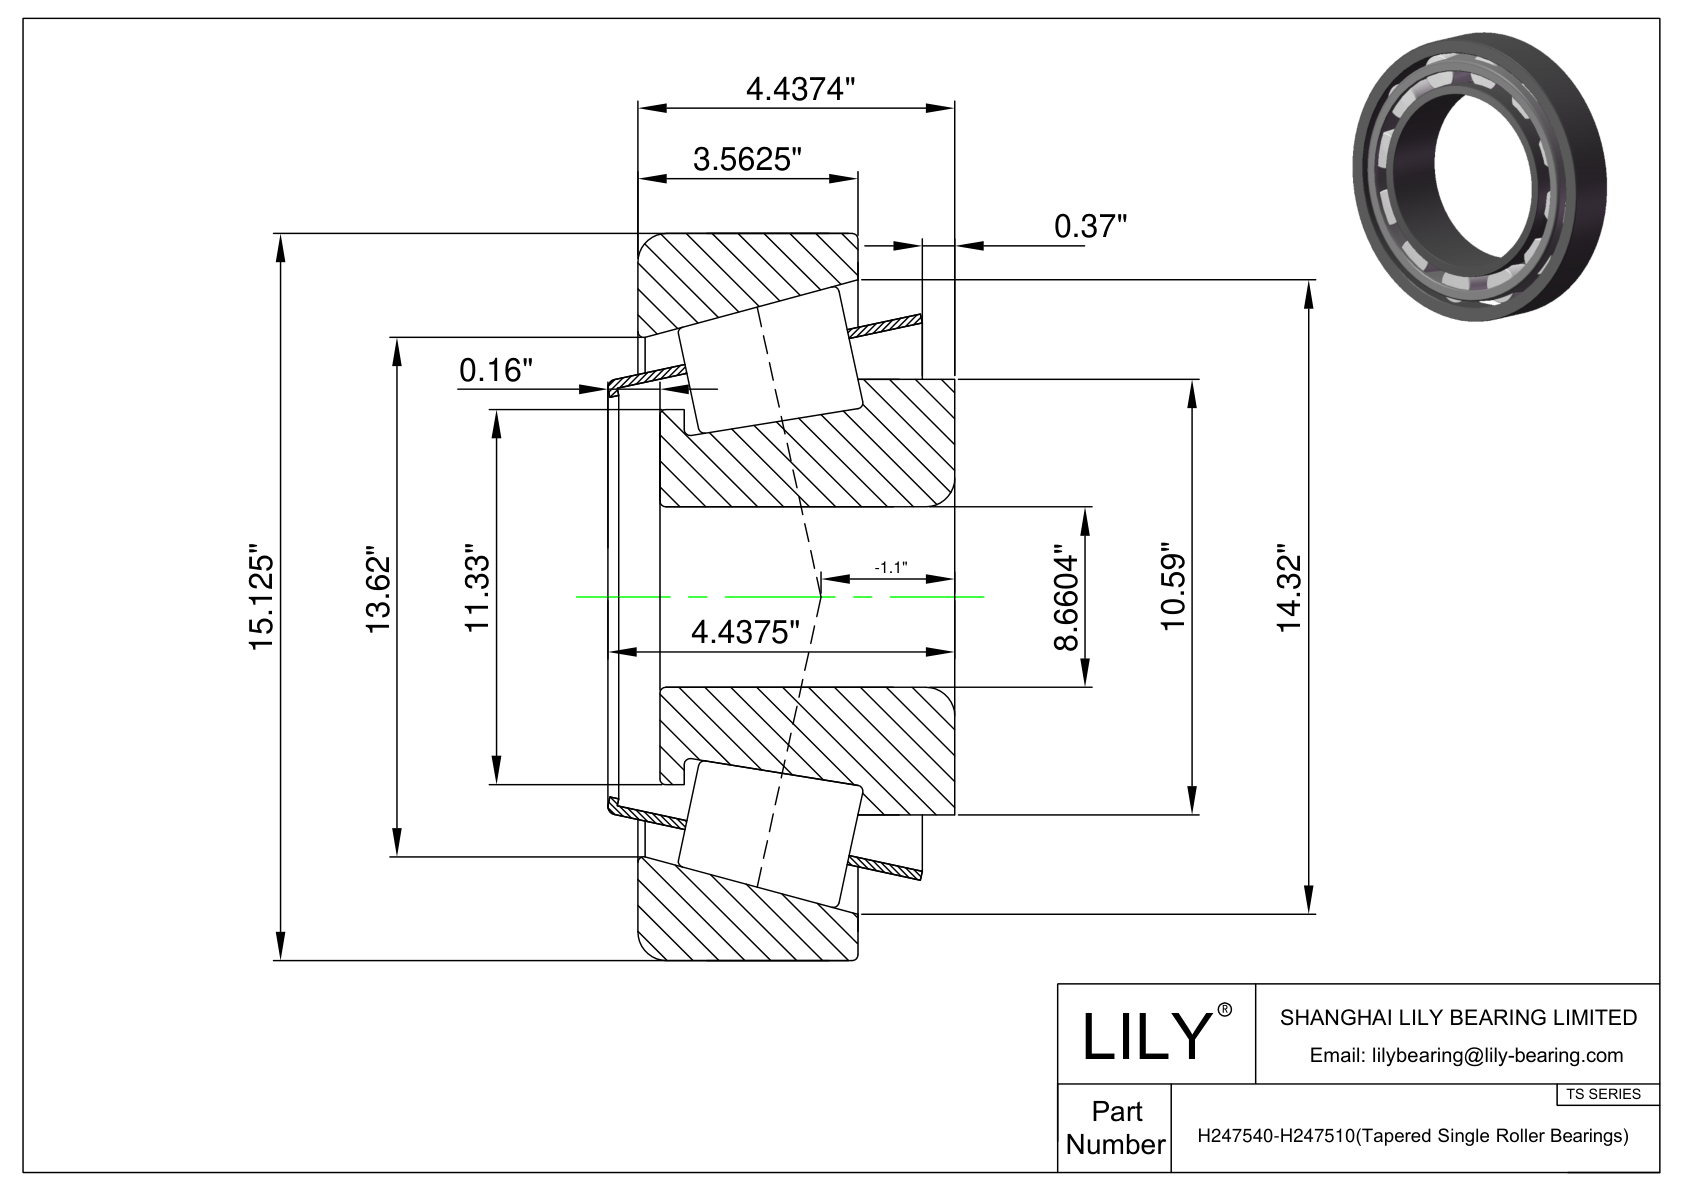 H247540-H247510 TS (Tapered Single Roller Bearings) (Imperial) cad drawing